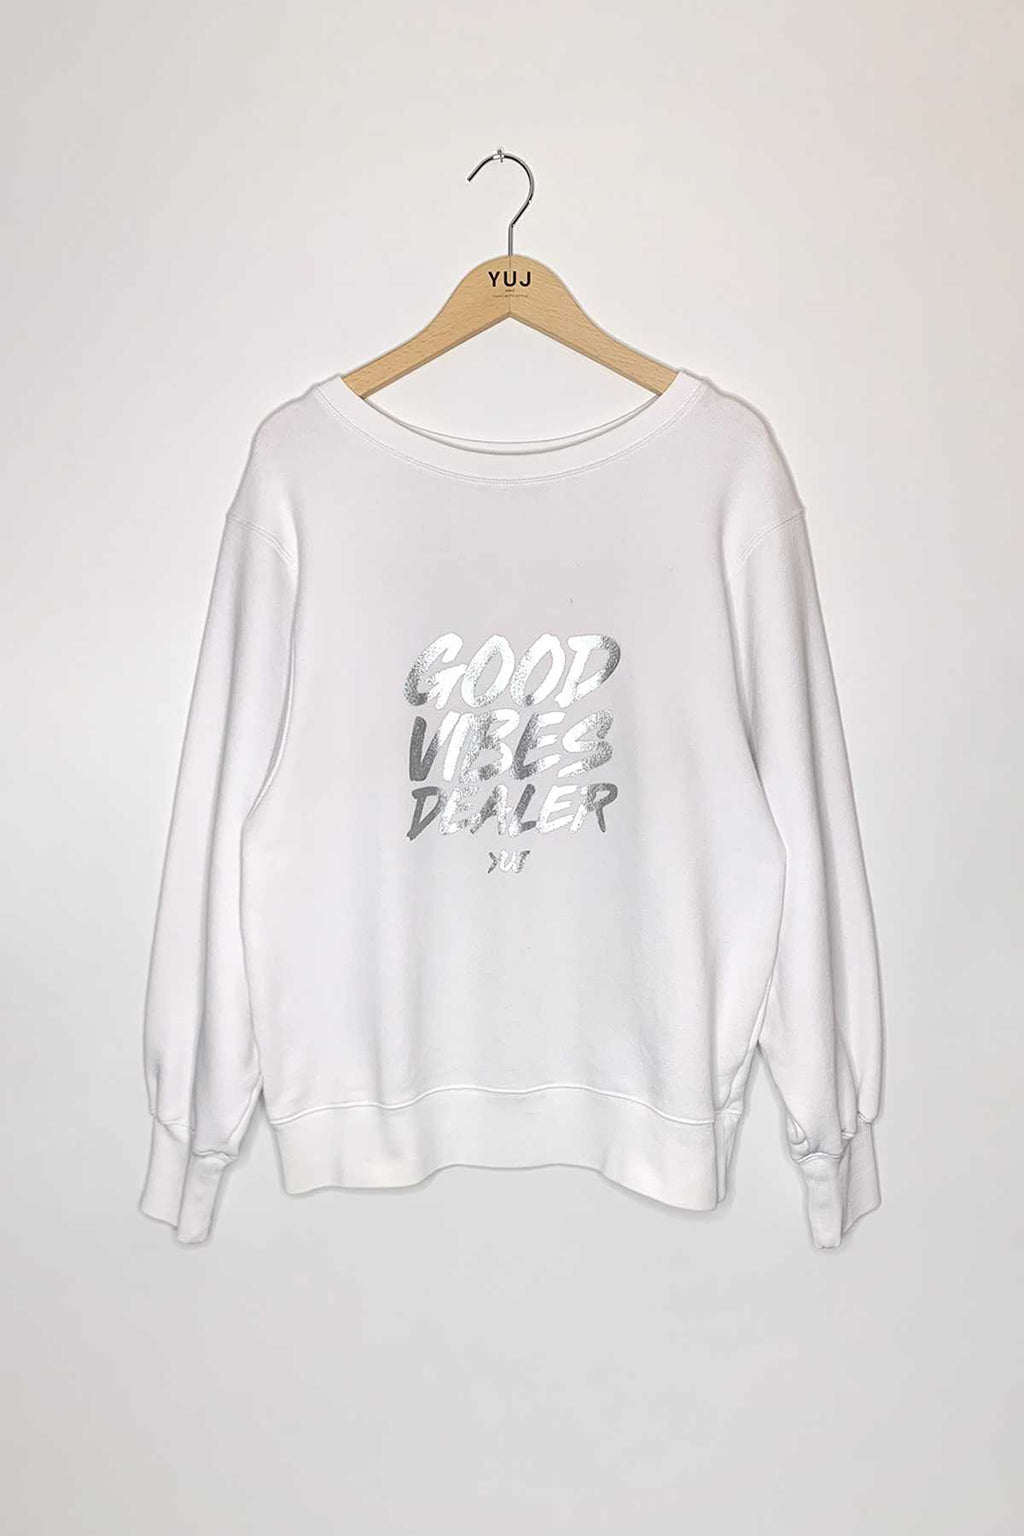 #475 - Sweat GOOD VIBES DEALER // Size S YUJ - House of Mindfulness